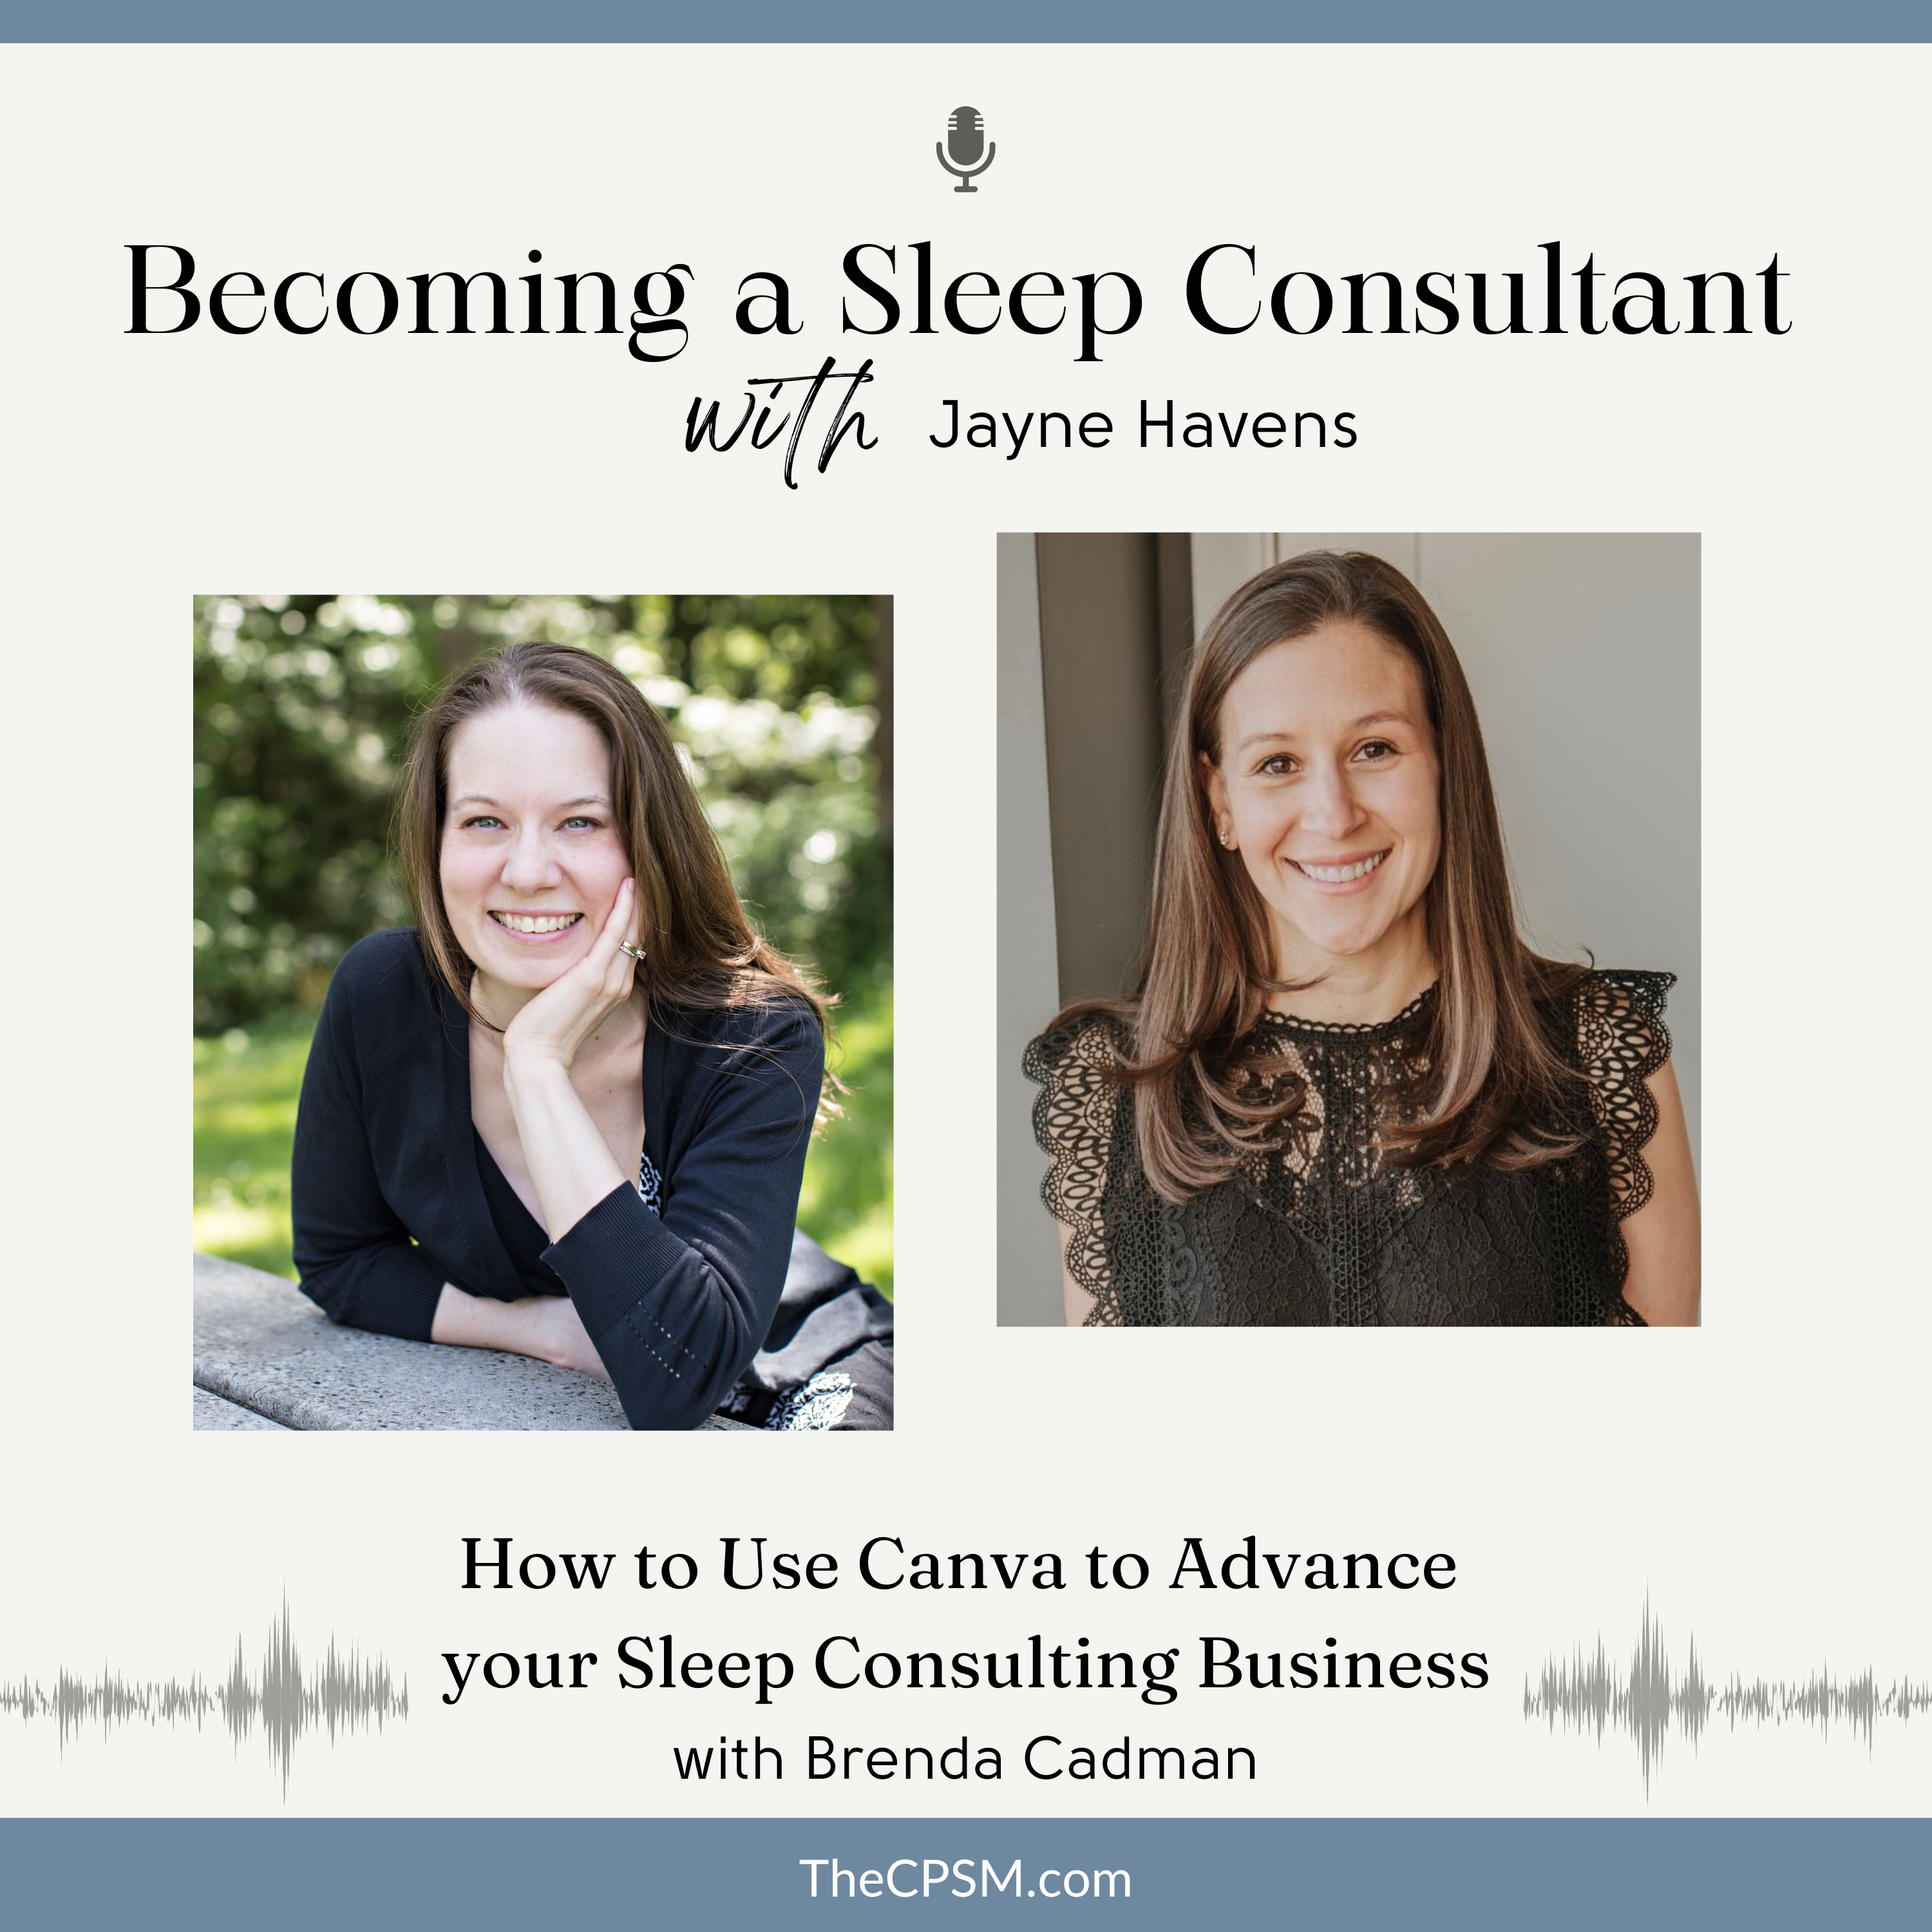 How to Use Canva to Advance your Sleep Consulting Business with Brenda Cadman